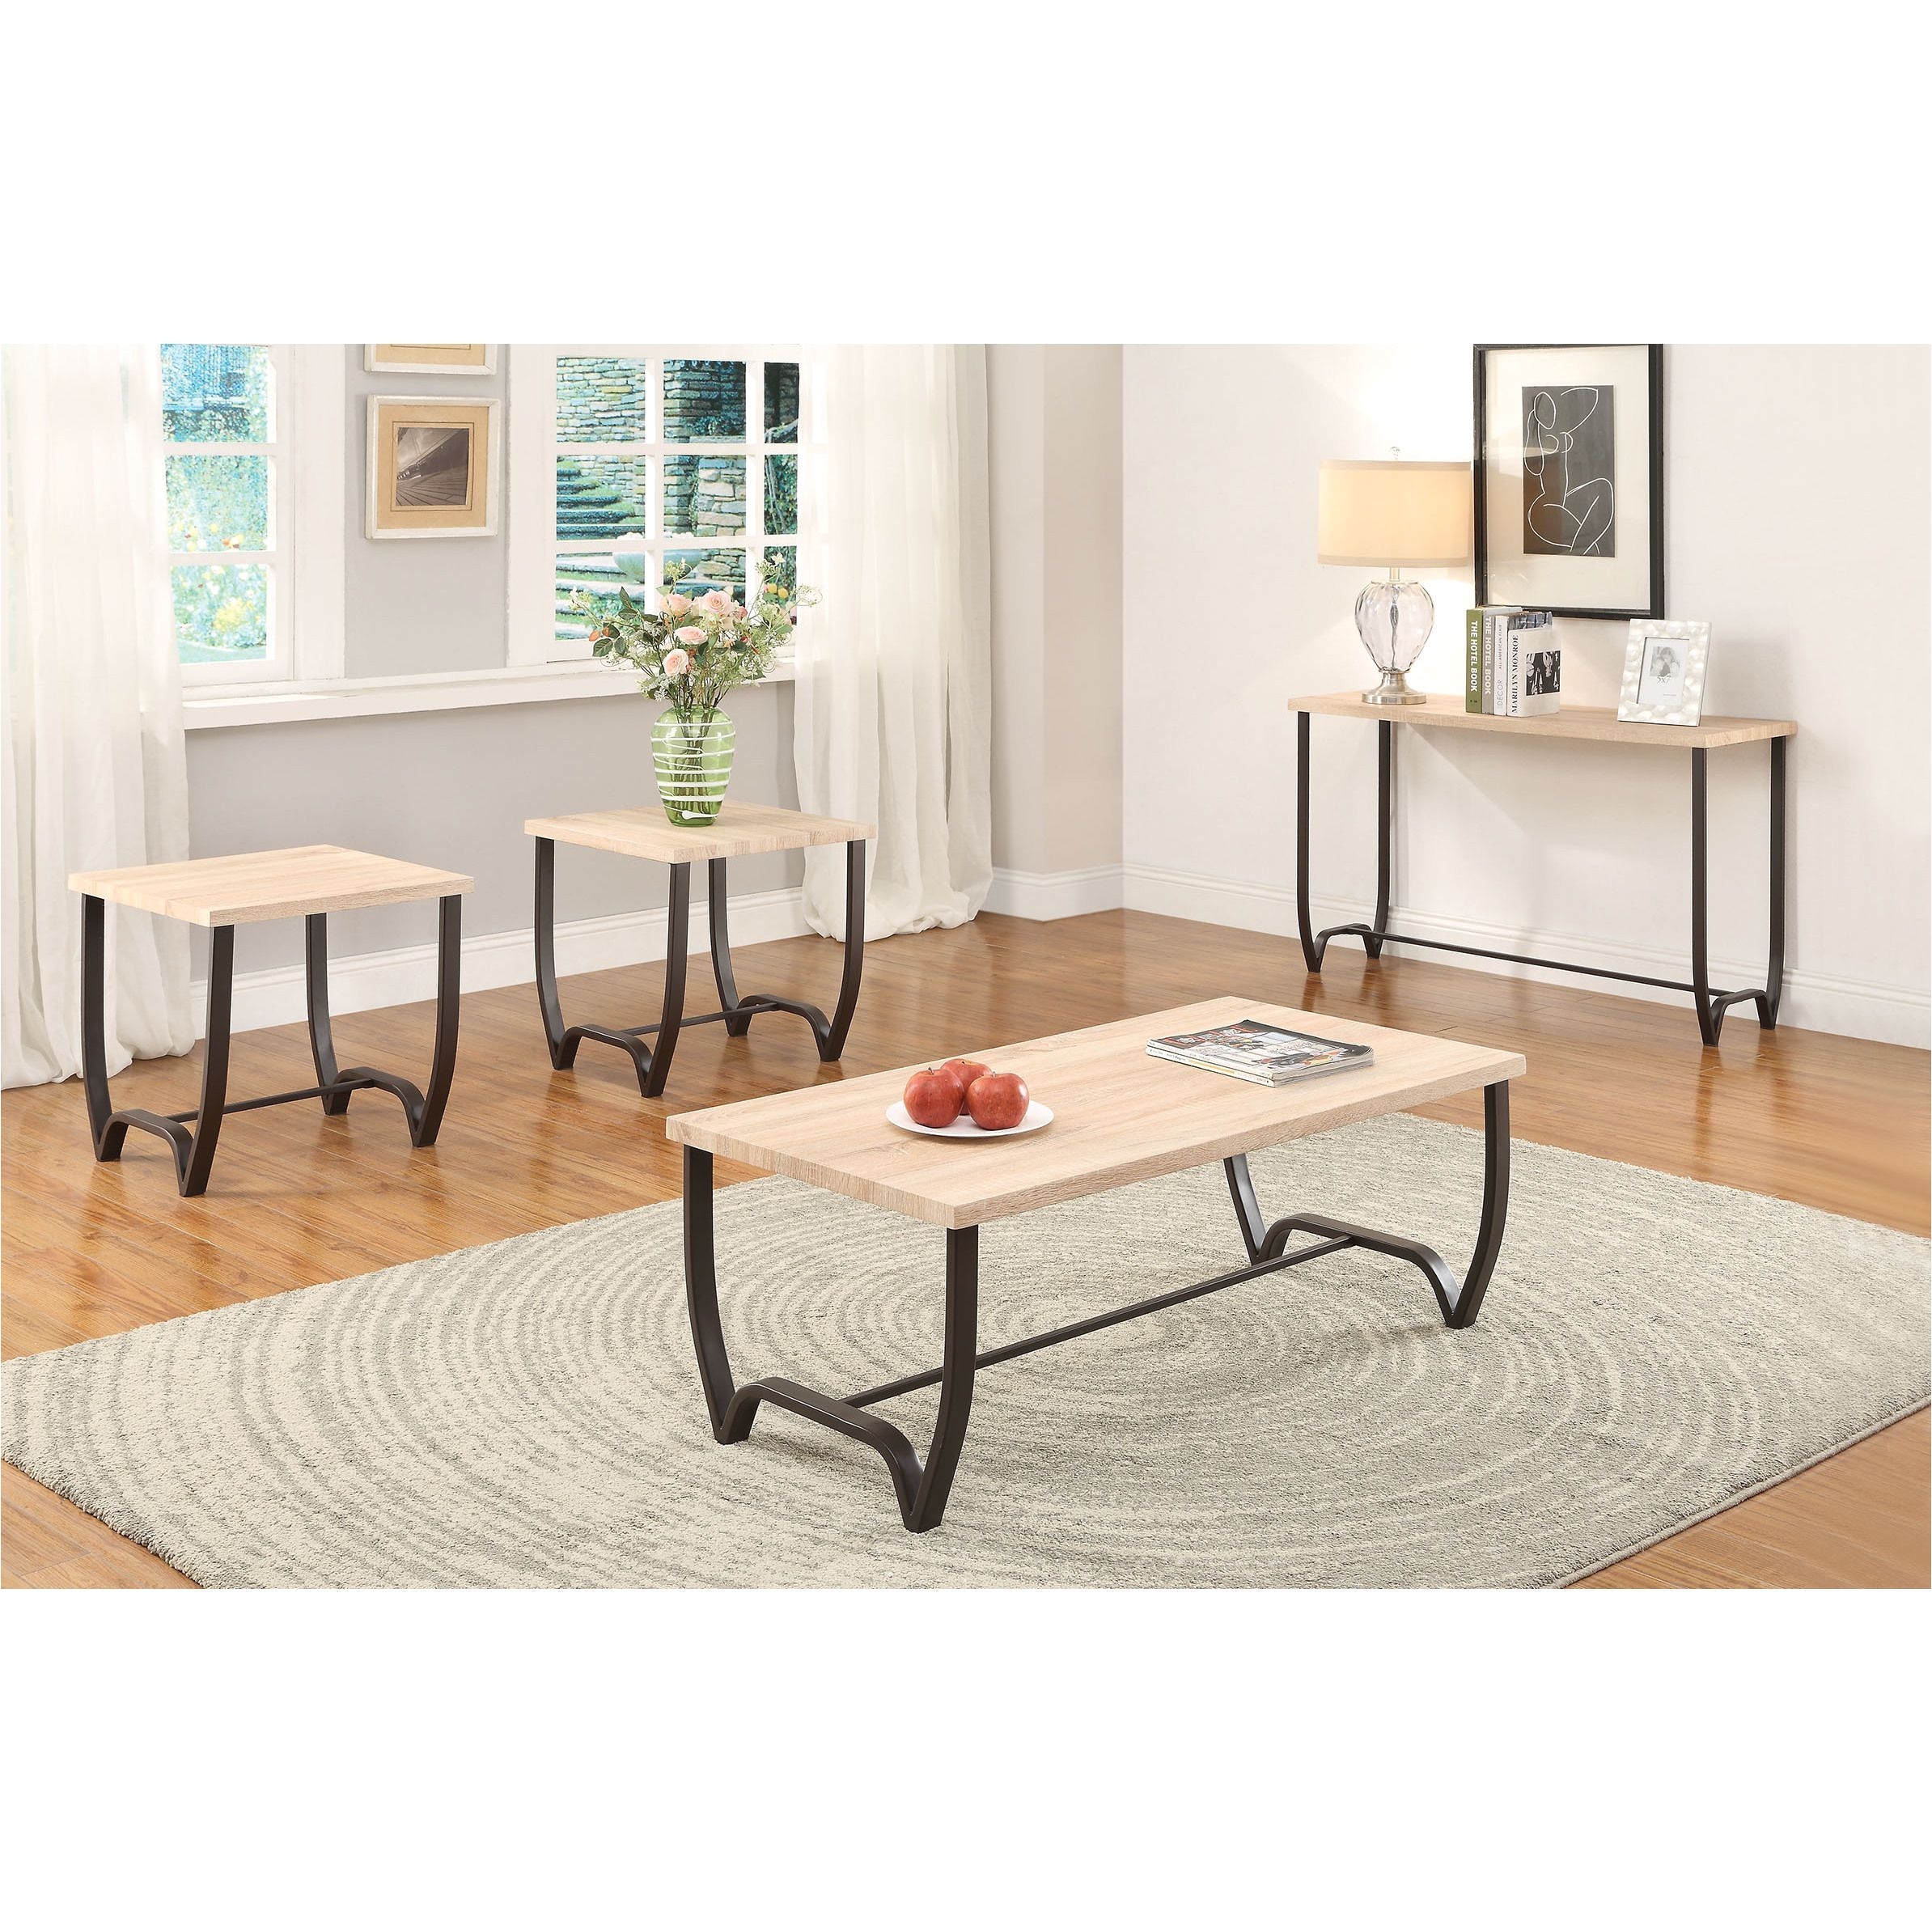 Isidore 3 Piece Coffee And End Table Set Natural & Brown Sand 3Pc Pk Coffee End Table Set Natural & Brown Sand